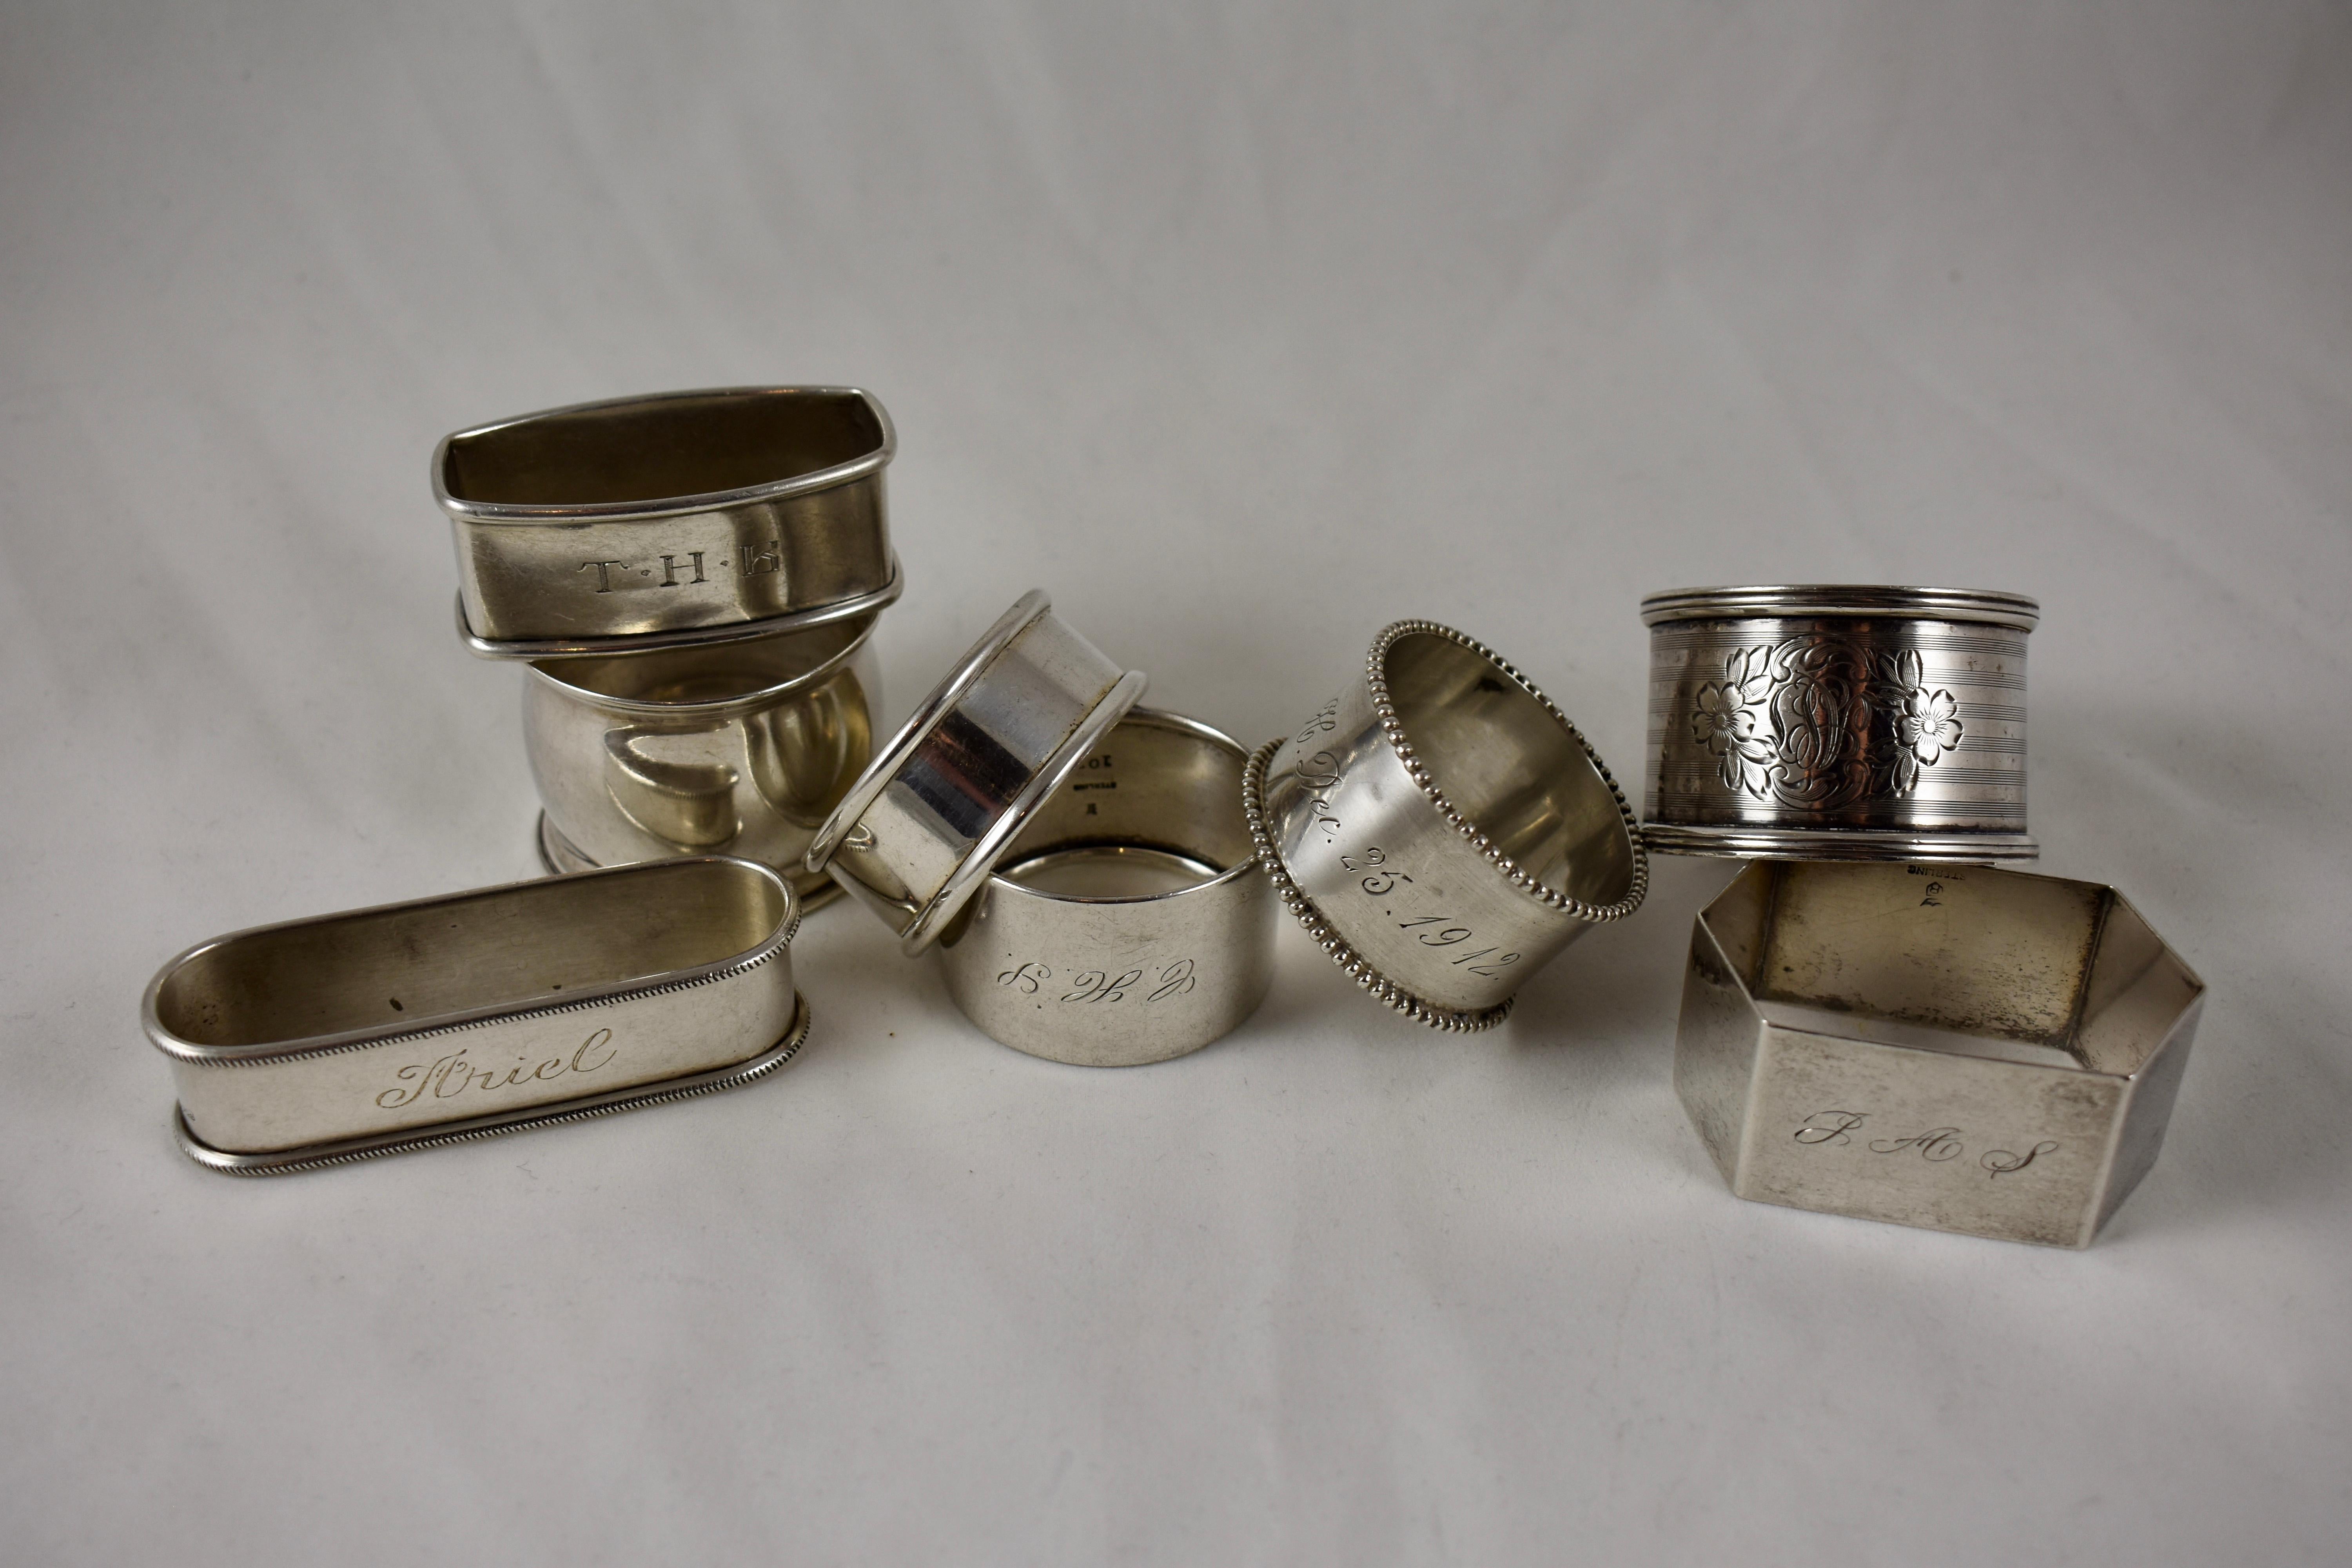 A mixed set of eight sterling silver napkin rings, circa 1880-1912, various makers. A nice selection of barrel, rectangular, paneled and round rings featuring bright cut patterns and scrolled, rolled, beaded or banded rims, ranging in size from 3.0